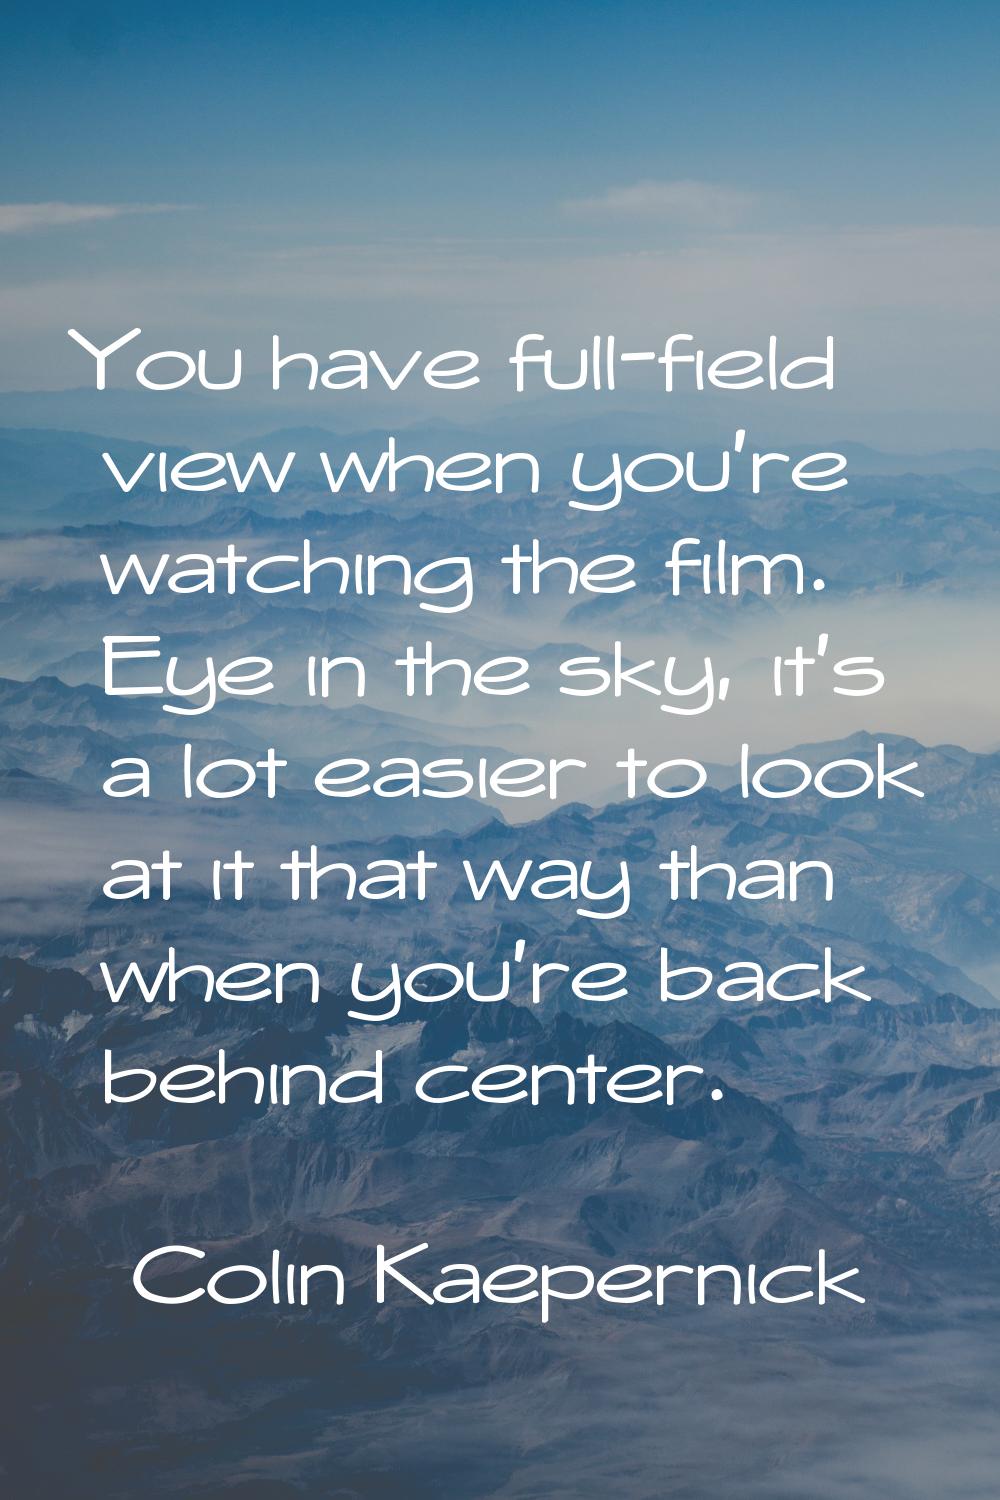 You have full-field view when you're watching the film. Eye in the sky, it's a lot easier to look a